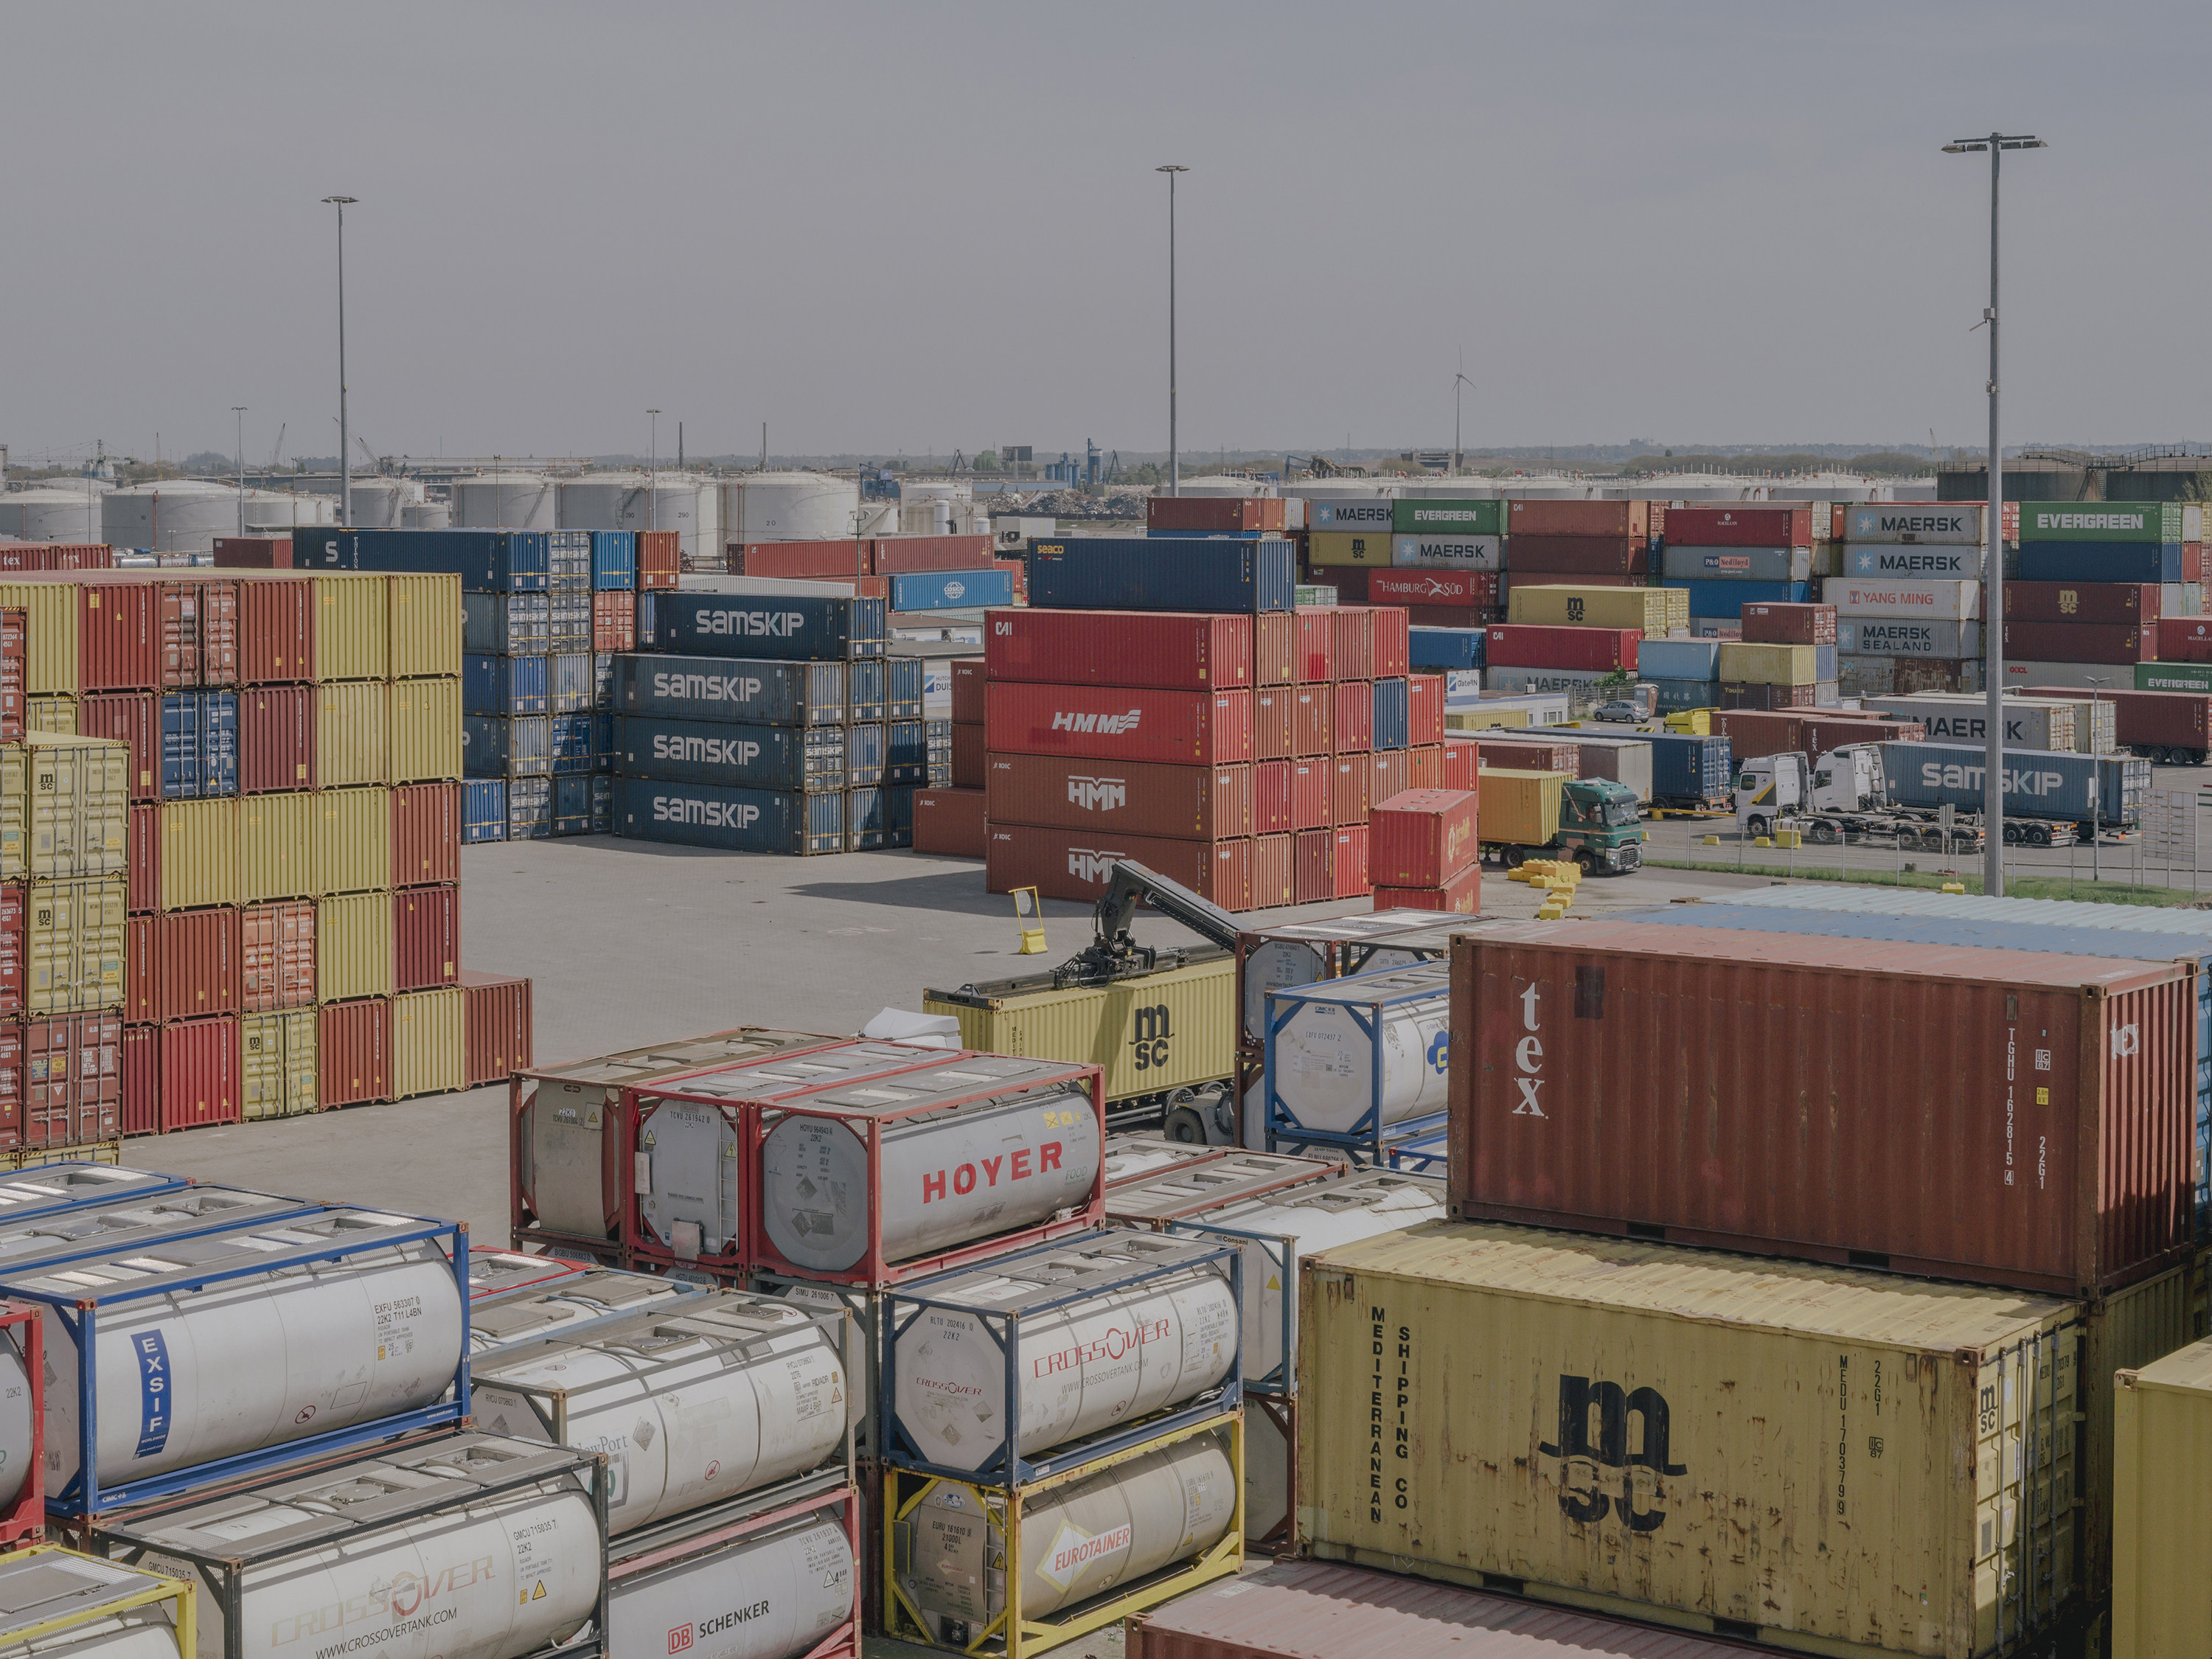 Duisburg, with the world’s biggest inland port, has served as a major hub for Chinese trade with Europe. Photo: Fabian Ritte for The Washington Post